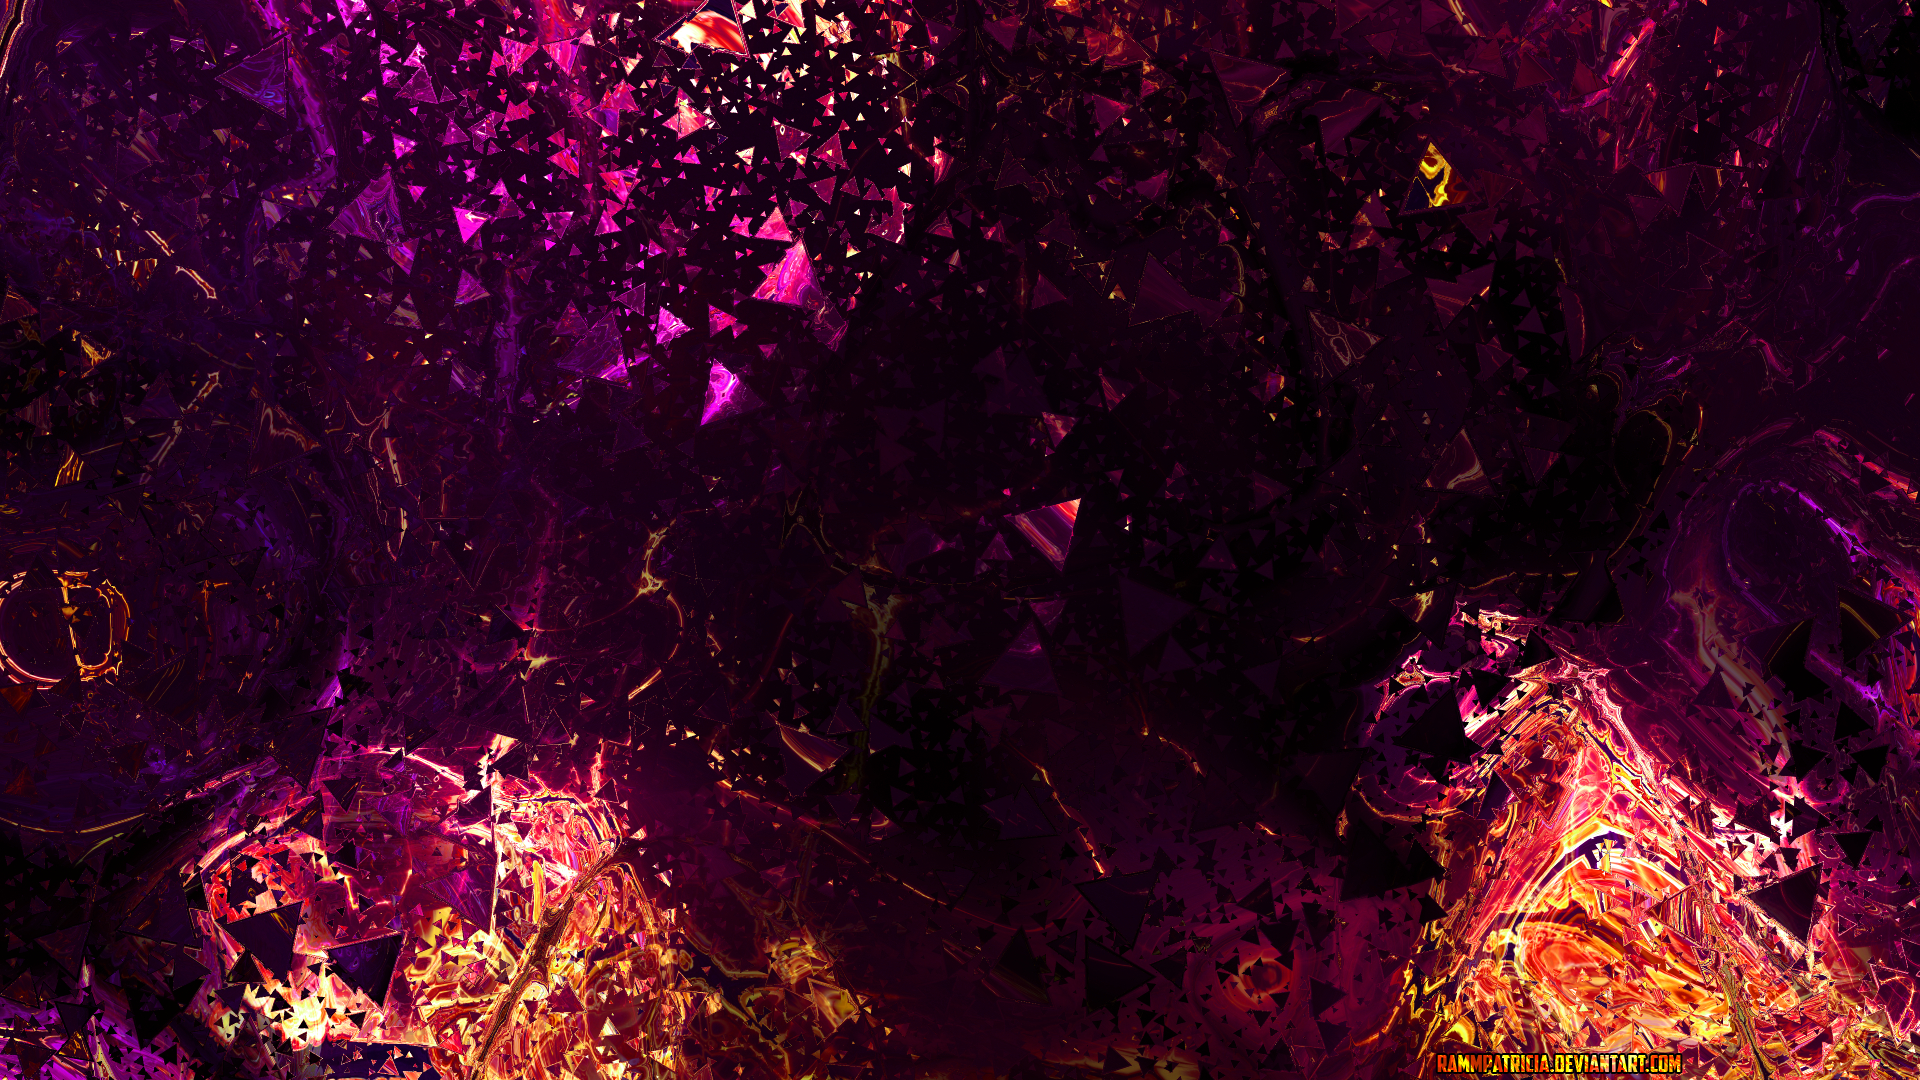 Digital Art RammPatricia Abstract Triangle Shattered 1920x1080